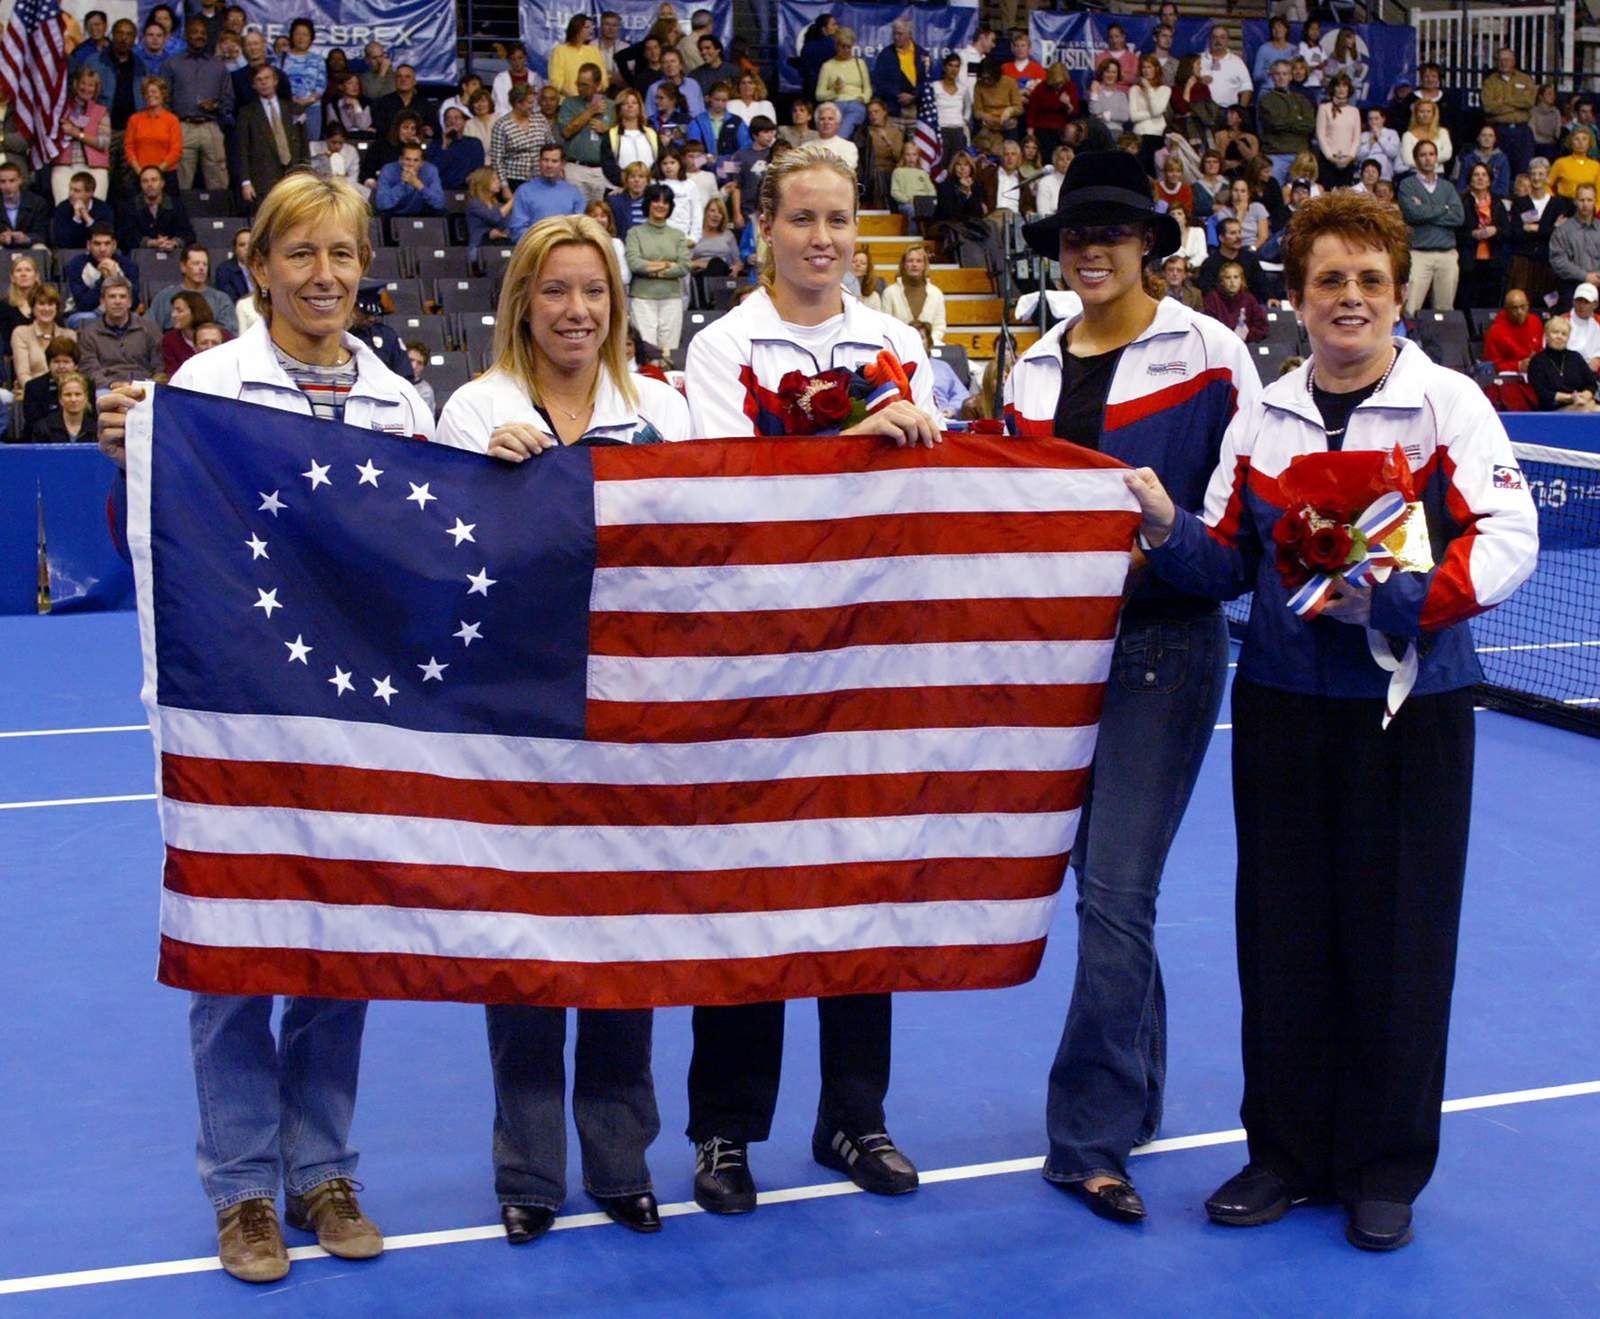 Fed Cup changes name to honor tennis great Billie Jean King